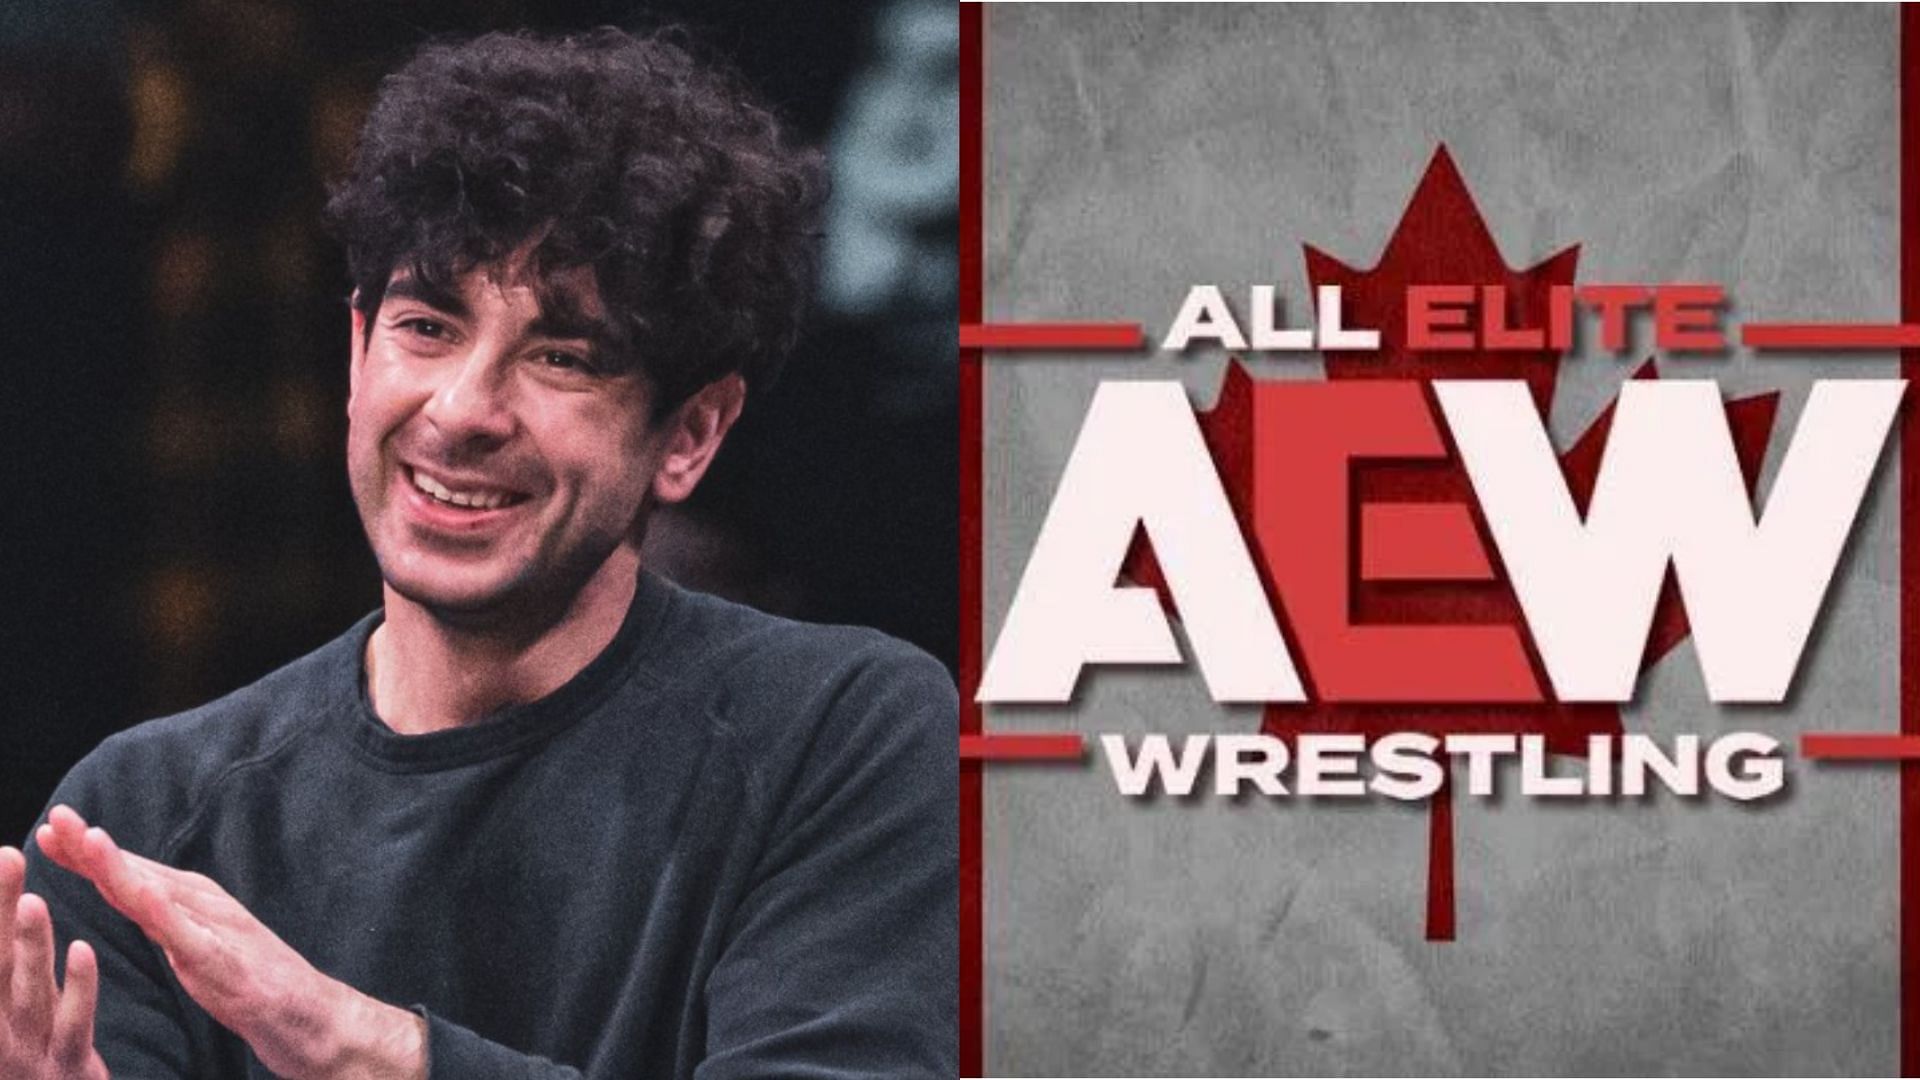 Tony Khan has another debut up his sleeve for AEW